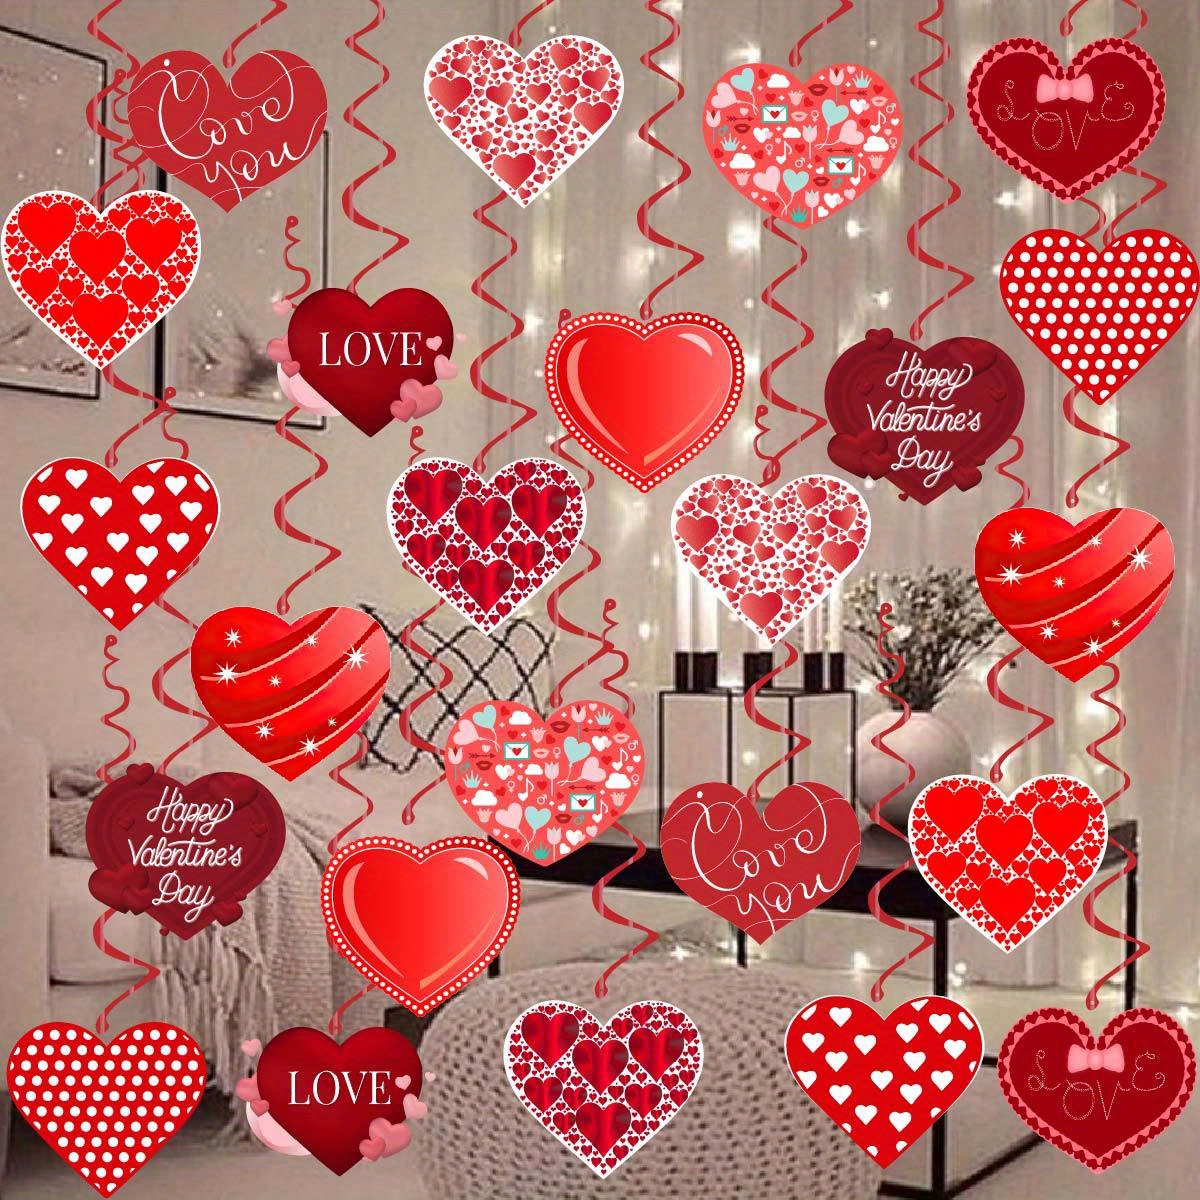  2 Pieces Valentine Fabric Heart Shaped Hanging Ornaments Red  Heart Garland Hanging Garland for Valentines Day and Wedding Decoration  Love Valentine Garland Banner : Home & Kitchen